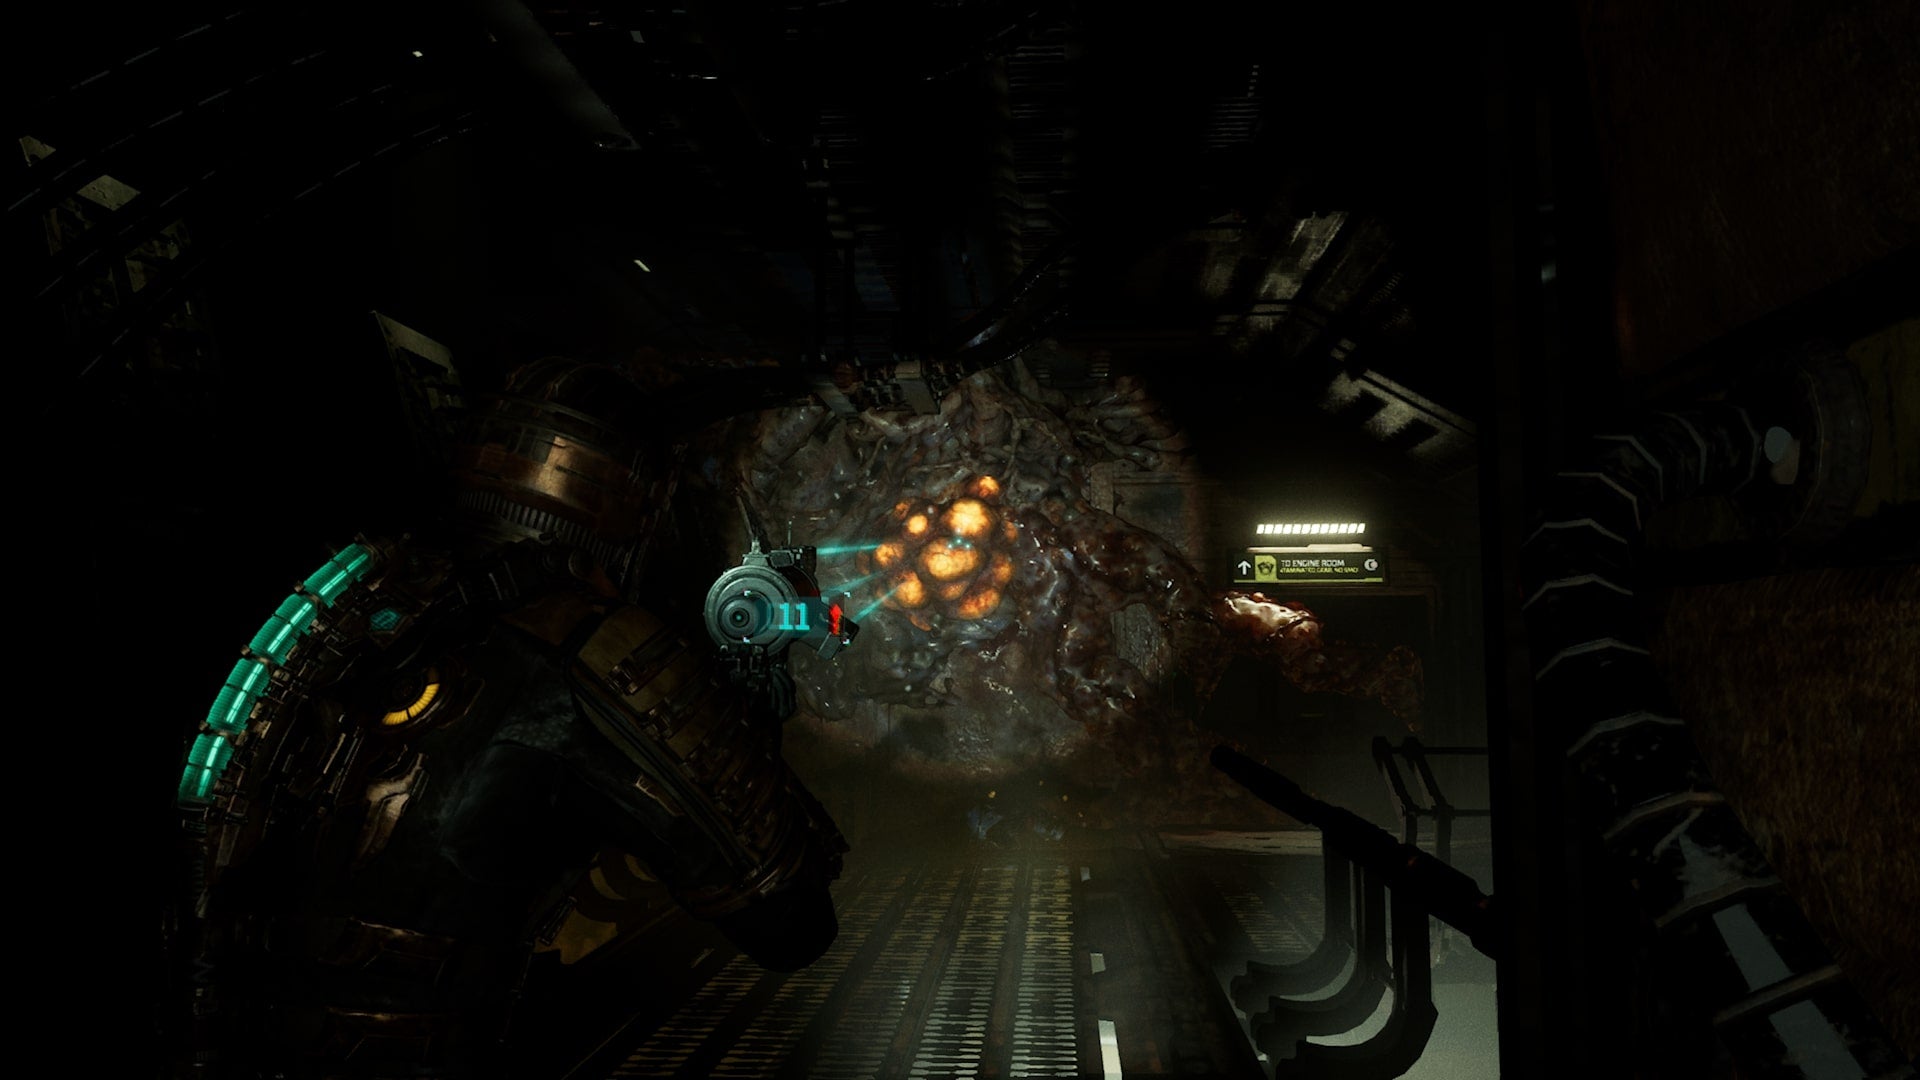 Isaac faces a corrosive bulb in Dead Space